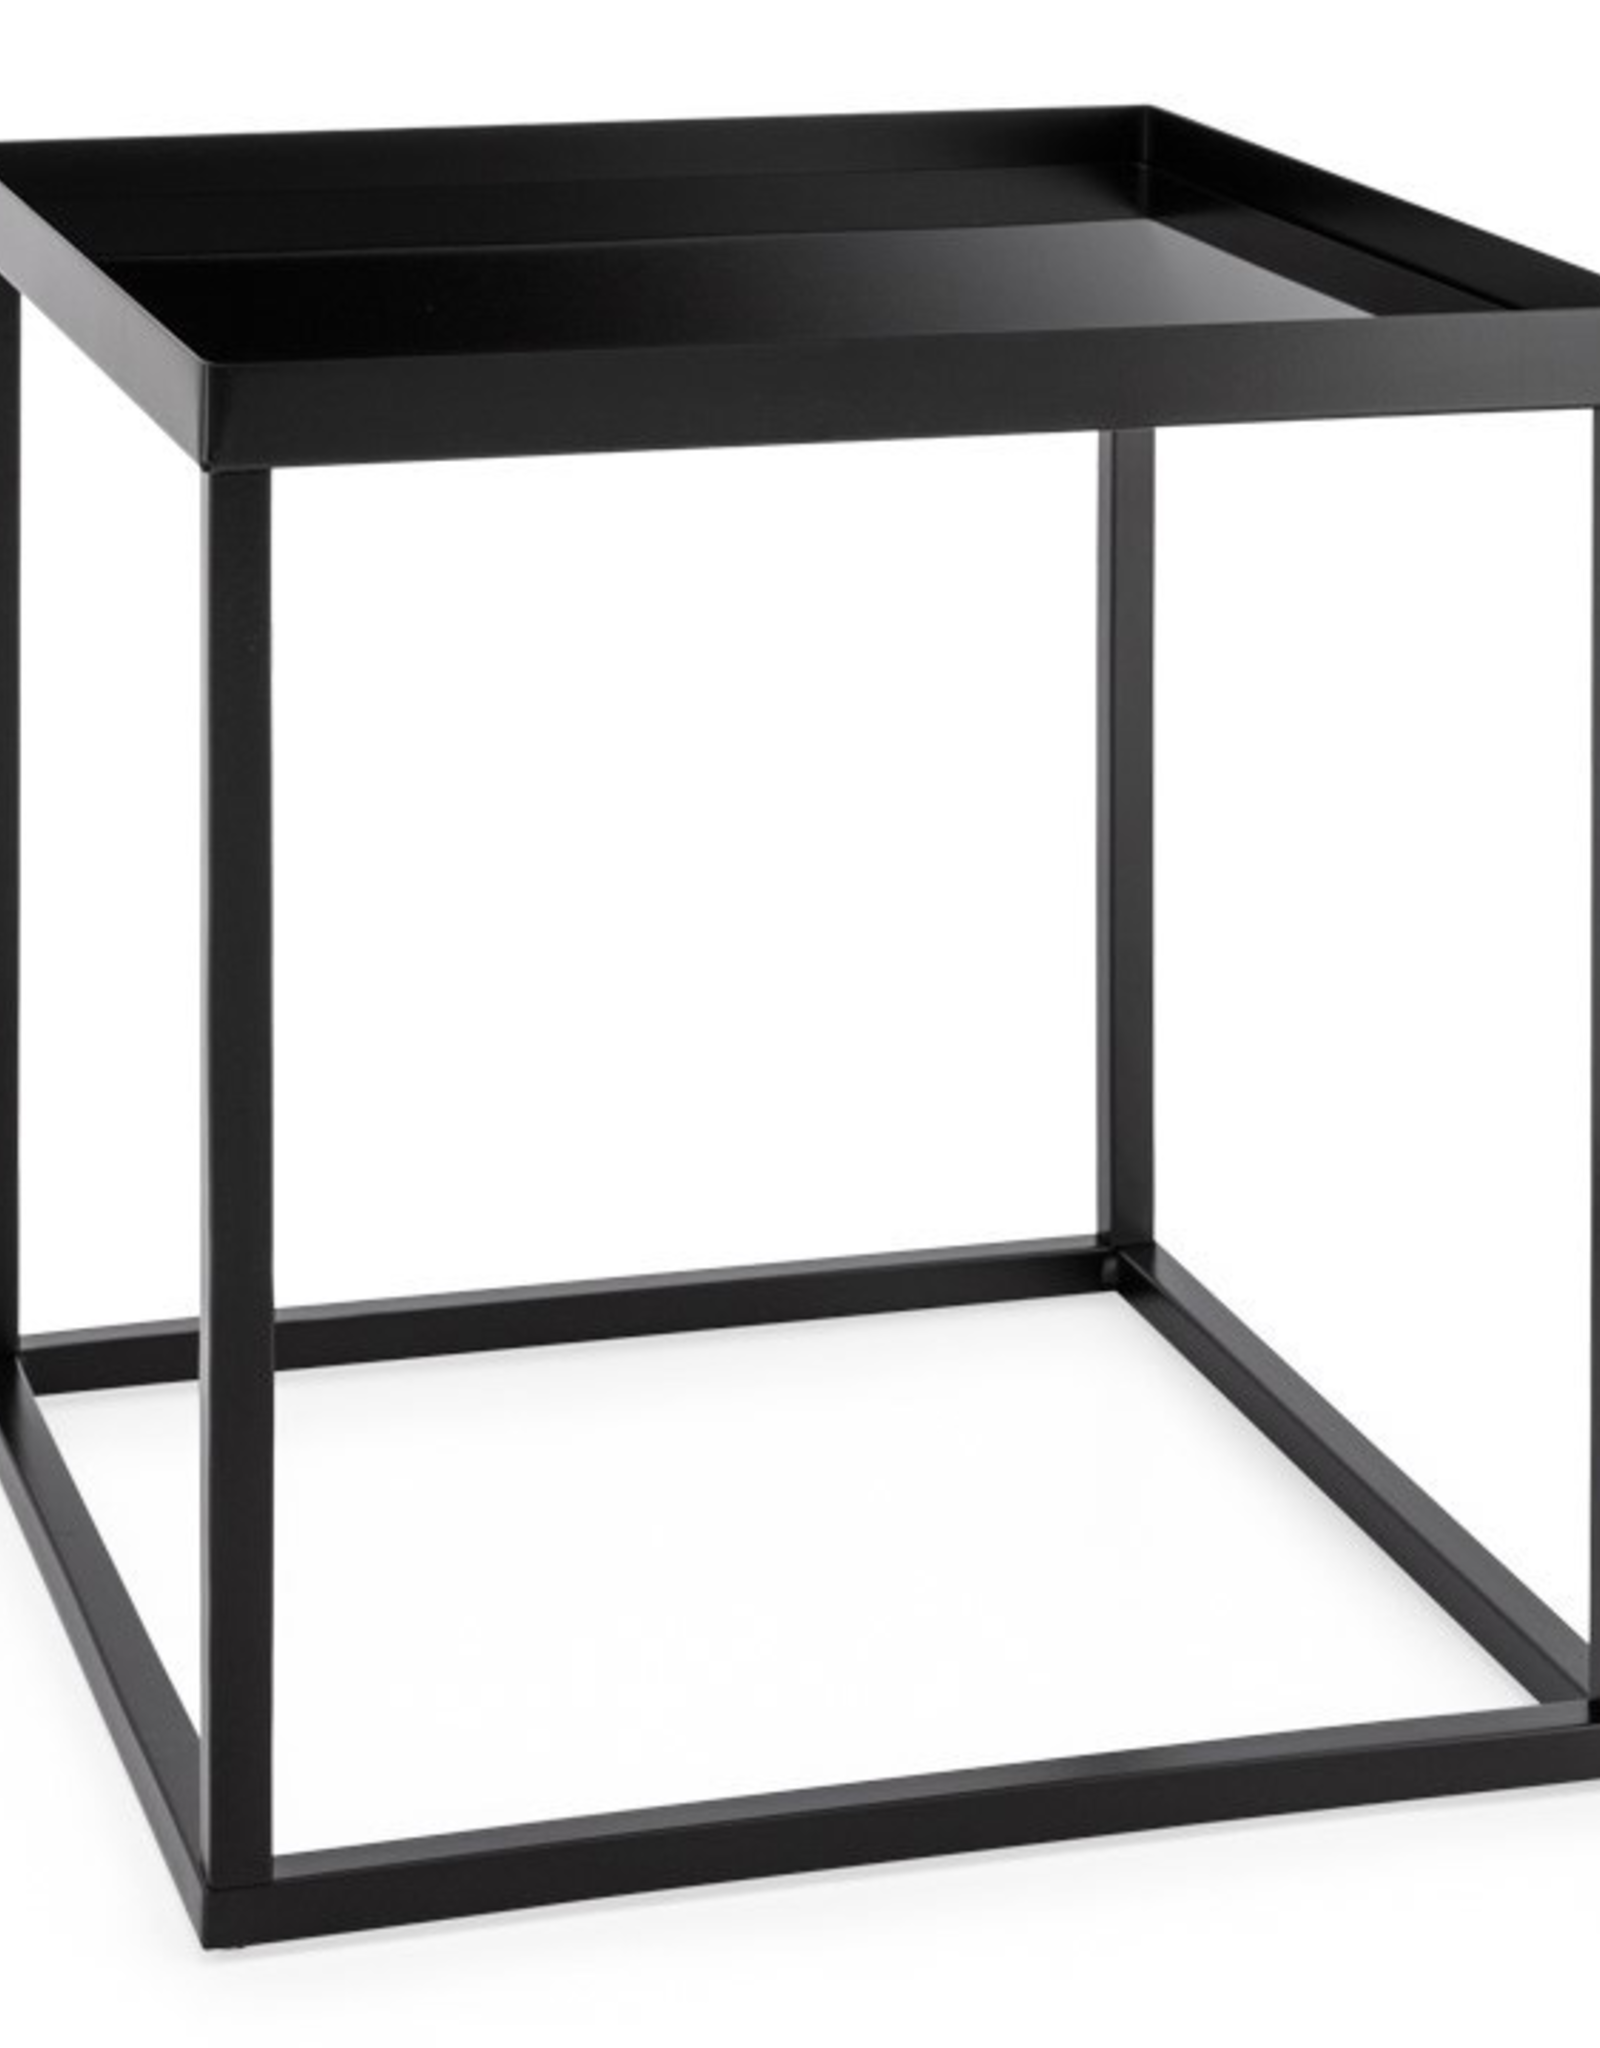 Cube Frame Table with Glass Top 16x16x16"